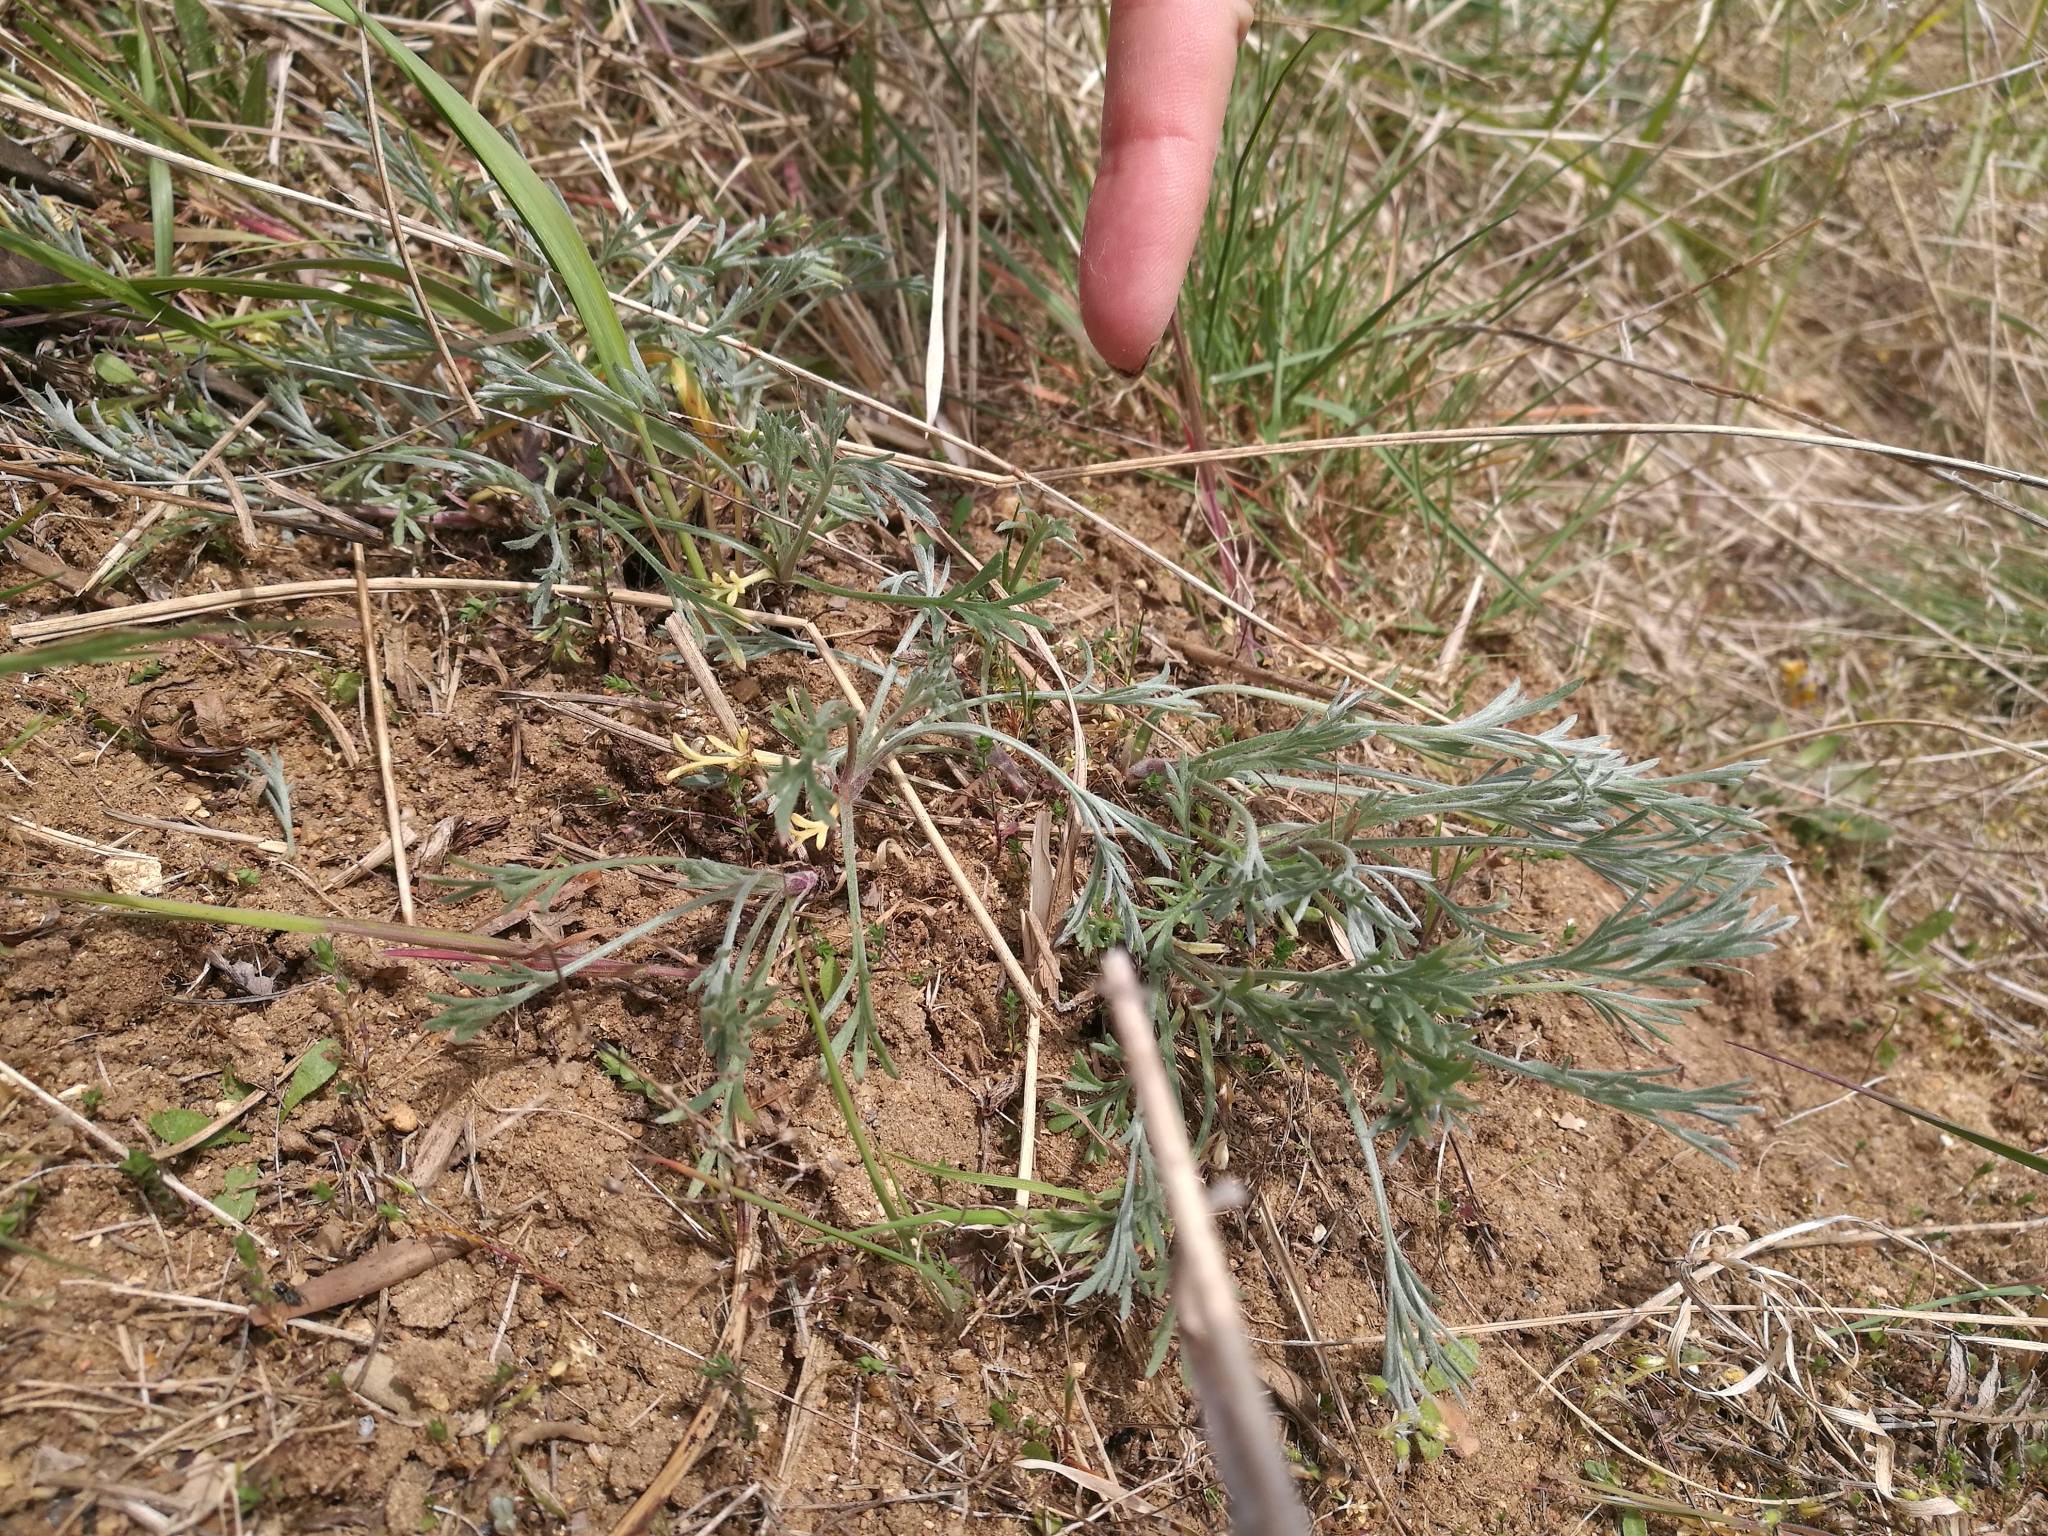 A photo from the FoTF Conservation Event - April 2022 - Scrub Clearance at Mildenhall Mugwort Pits : A close-up of a Mugwoort plant